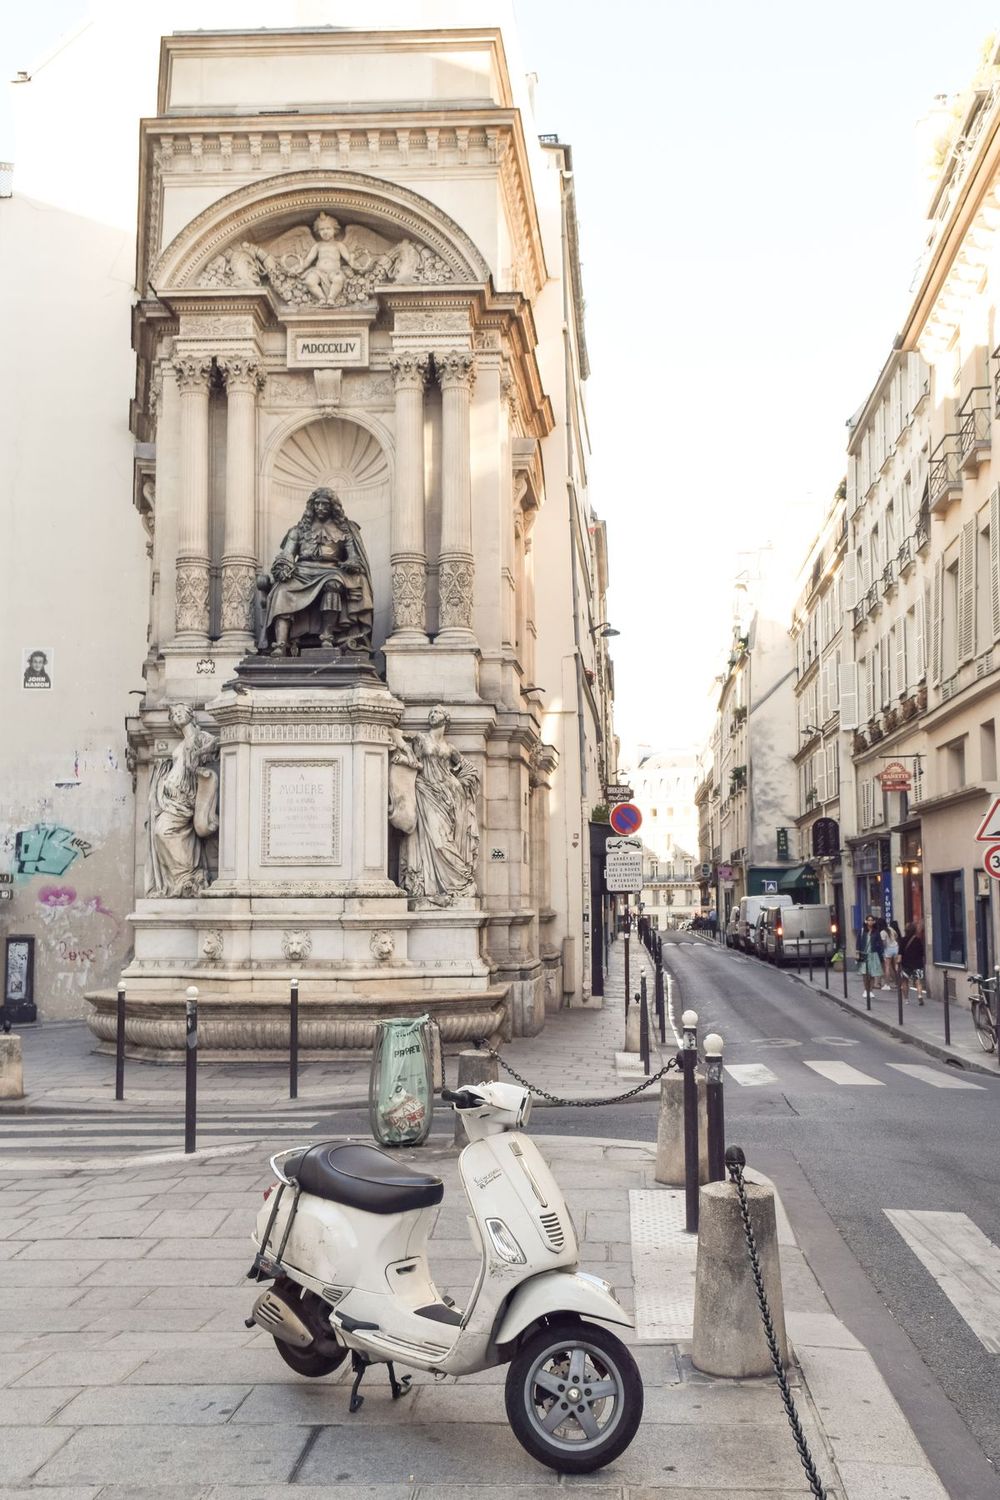 Fontaine Molière: a Monument to the Famous French Playwright